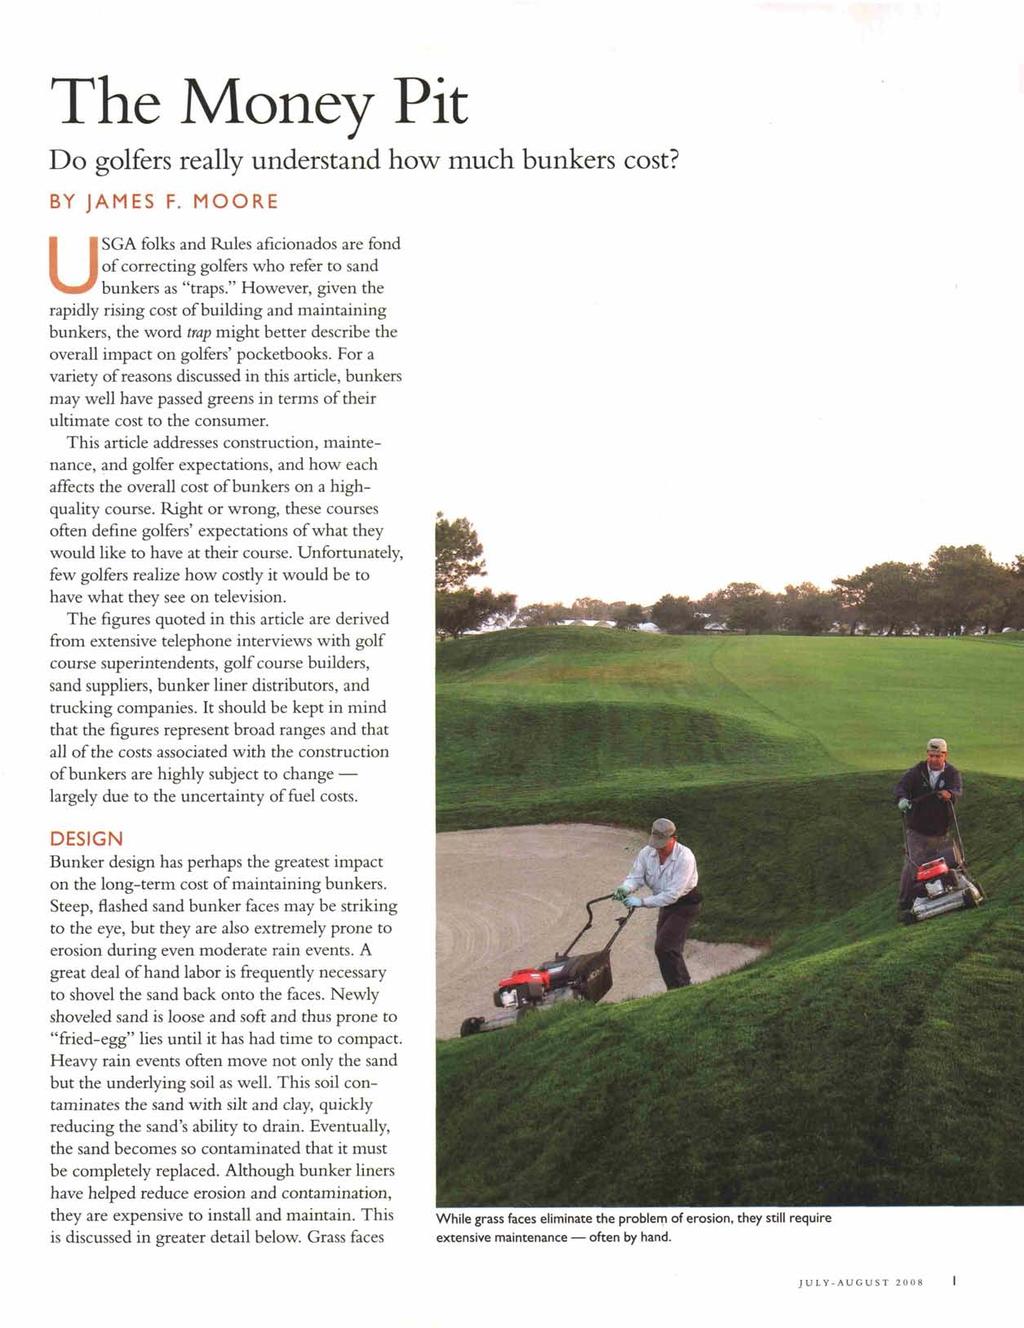 The Money Pit Do golfers really understand how much bunkers cost? BY JAMES F. MOORE USGA folks and Rules aficionados are fond of correcting golfers who refer to sand bunkers as "traps.